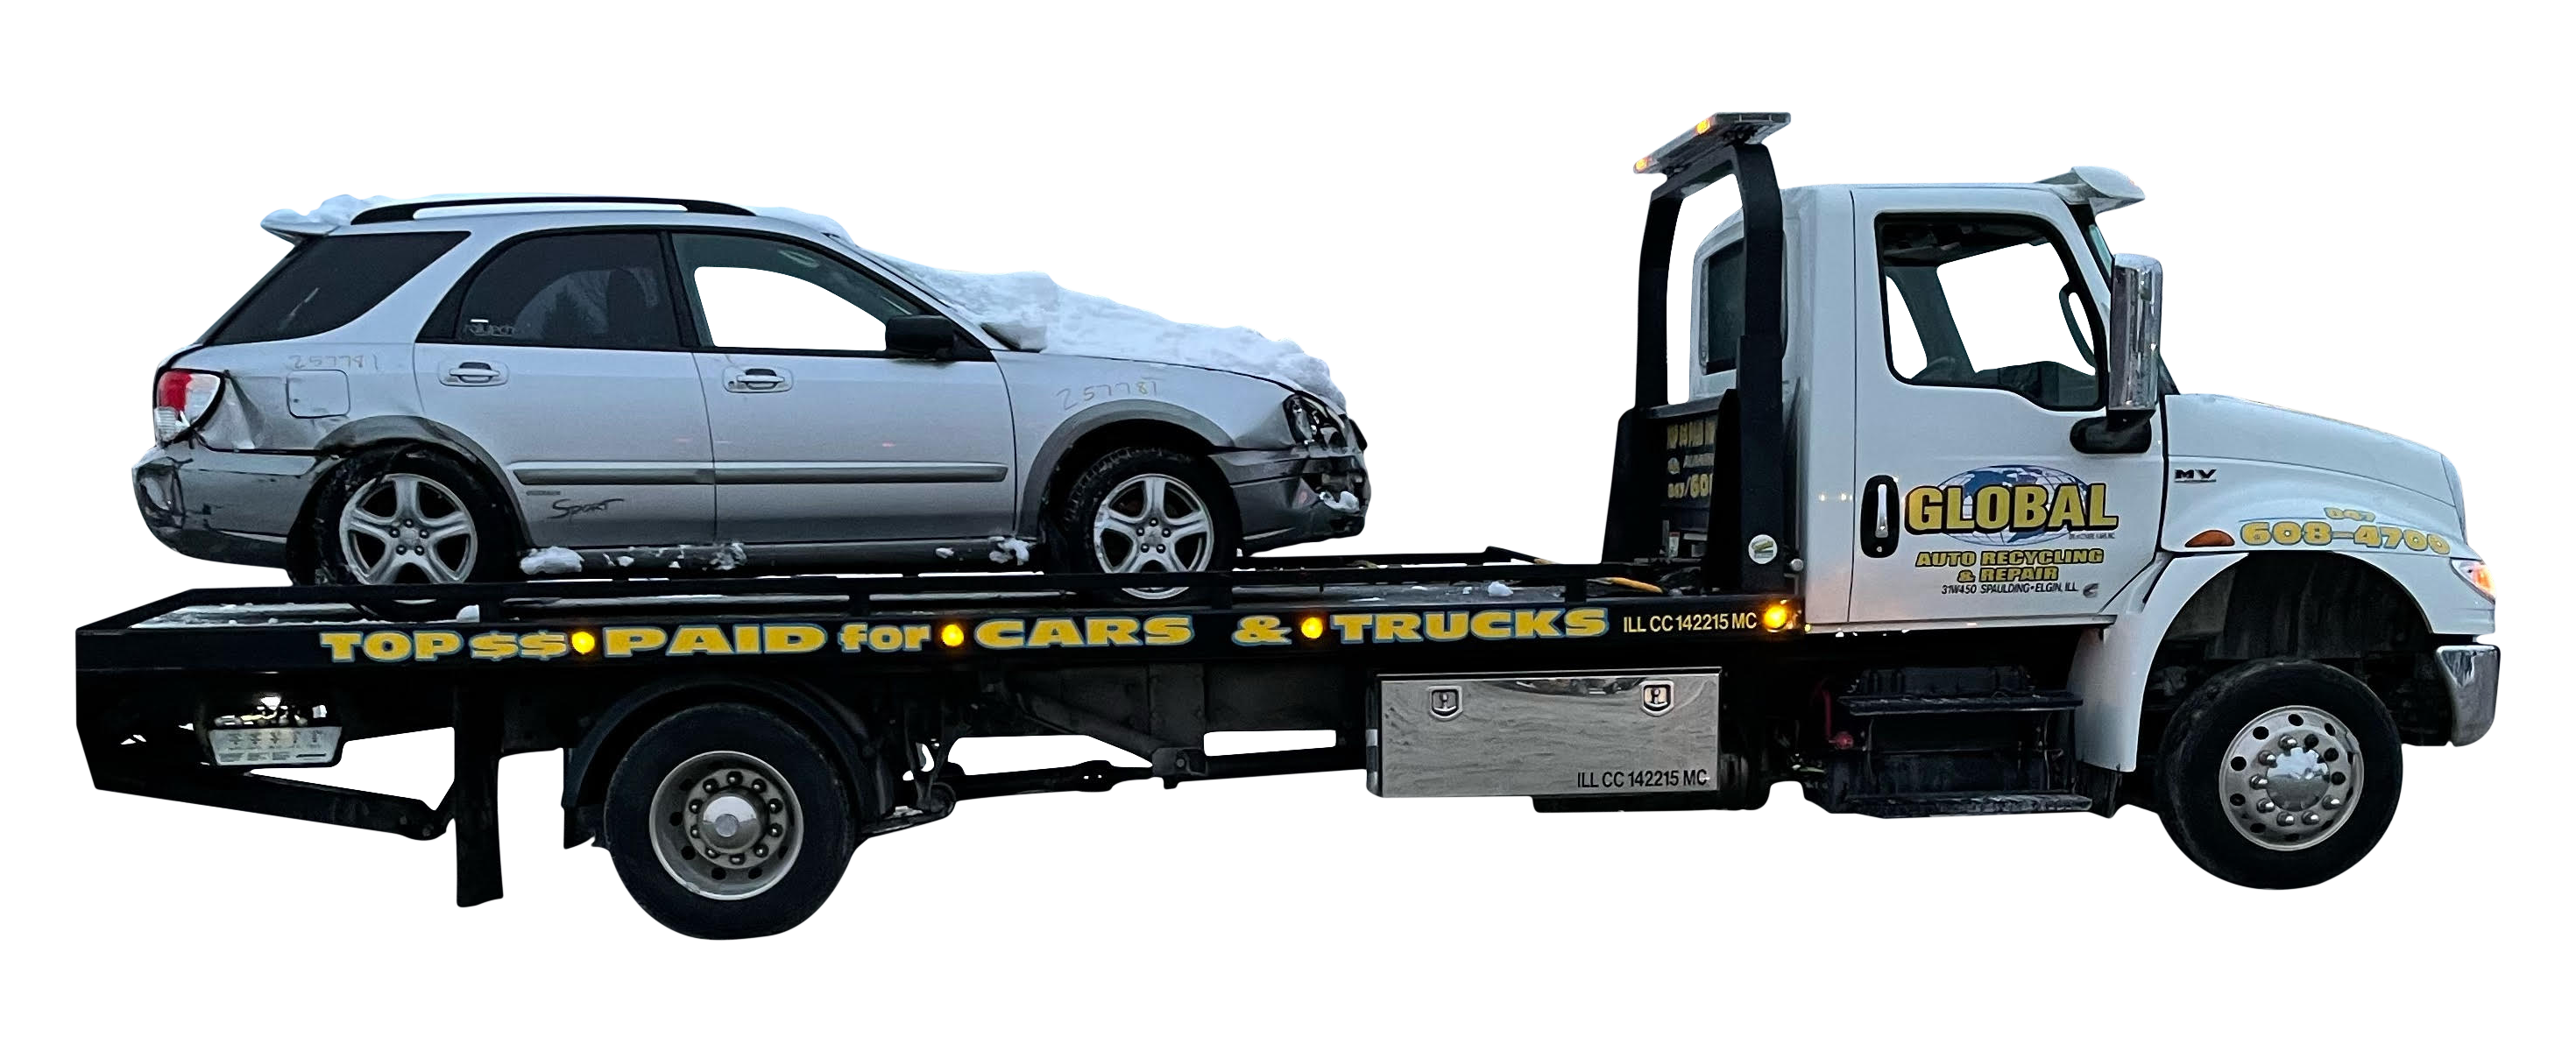 A car is being towed by a tow truck.